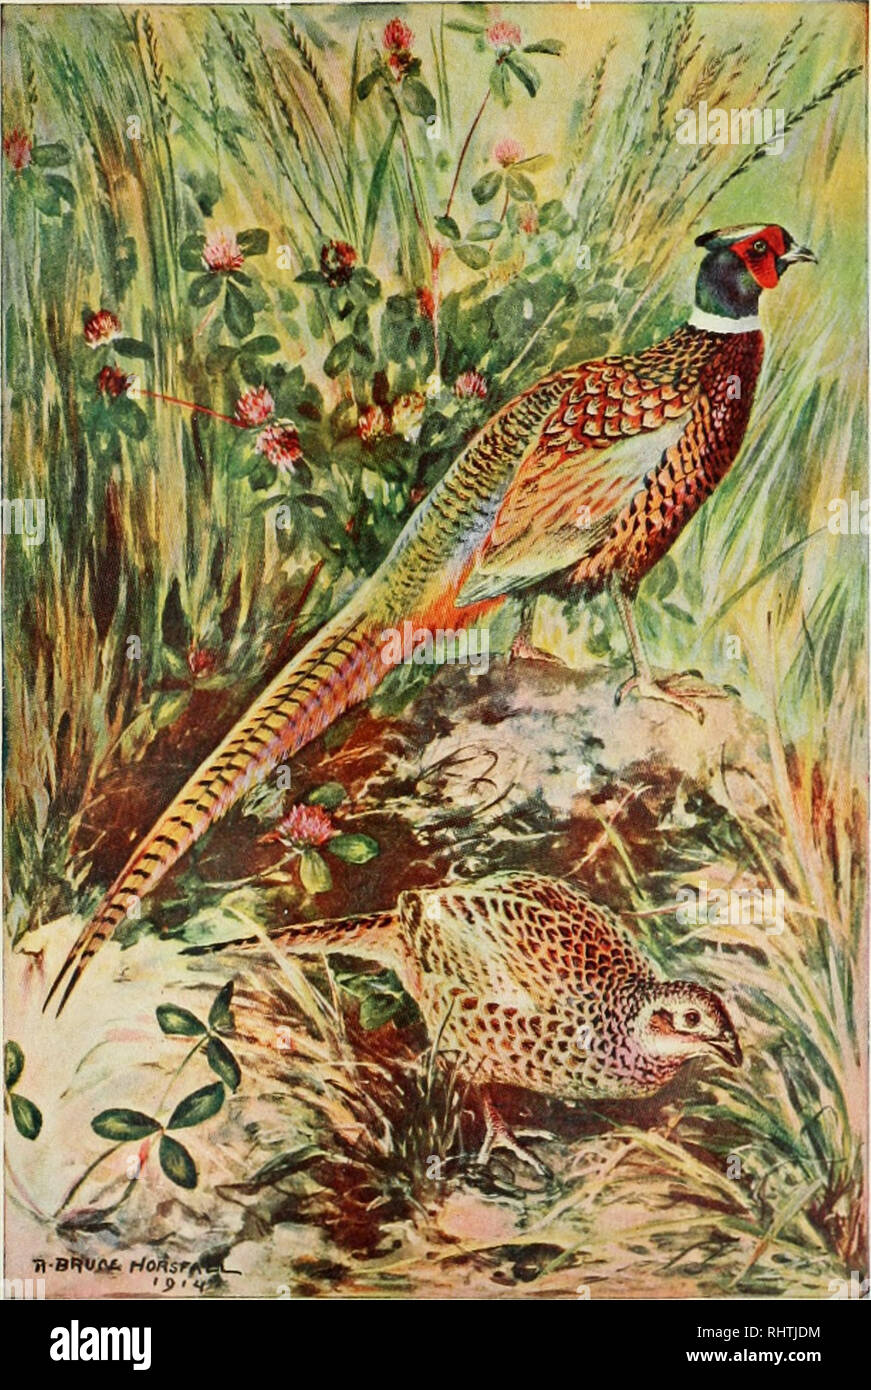 . Better fruit. Fruit-culture. y  BETTER FRUIT Volume IX MARCH, 1915 Number 9 GROWERS' COUNCIL OF 107 AND THE PLAN OF CONTROLLING MARKETING CONCERNS AND OBTAINING FULL MARKET VALUES FOR OUR FRUIT. The China pheasant, was introduced into OruKon by the late Judge Denny, and has increased rapidly. It is the most beautiful game bird in the world and the most fascinating for the sports- man, adding much to the attractiveness of the Northwest. Kastern visitors to the Panama- Pacific Exposition will see from the car windows large flocks of pheasants throughout the entire Willamette Valley, feeding i Stock Photo